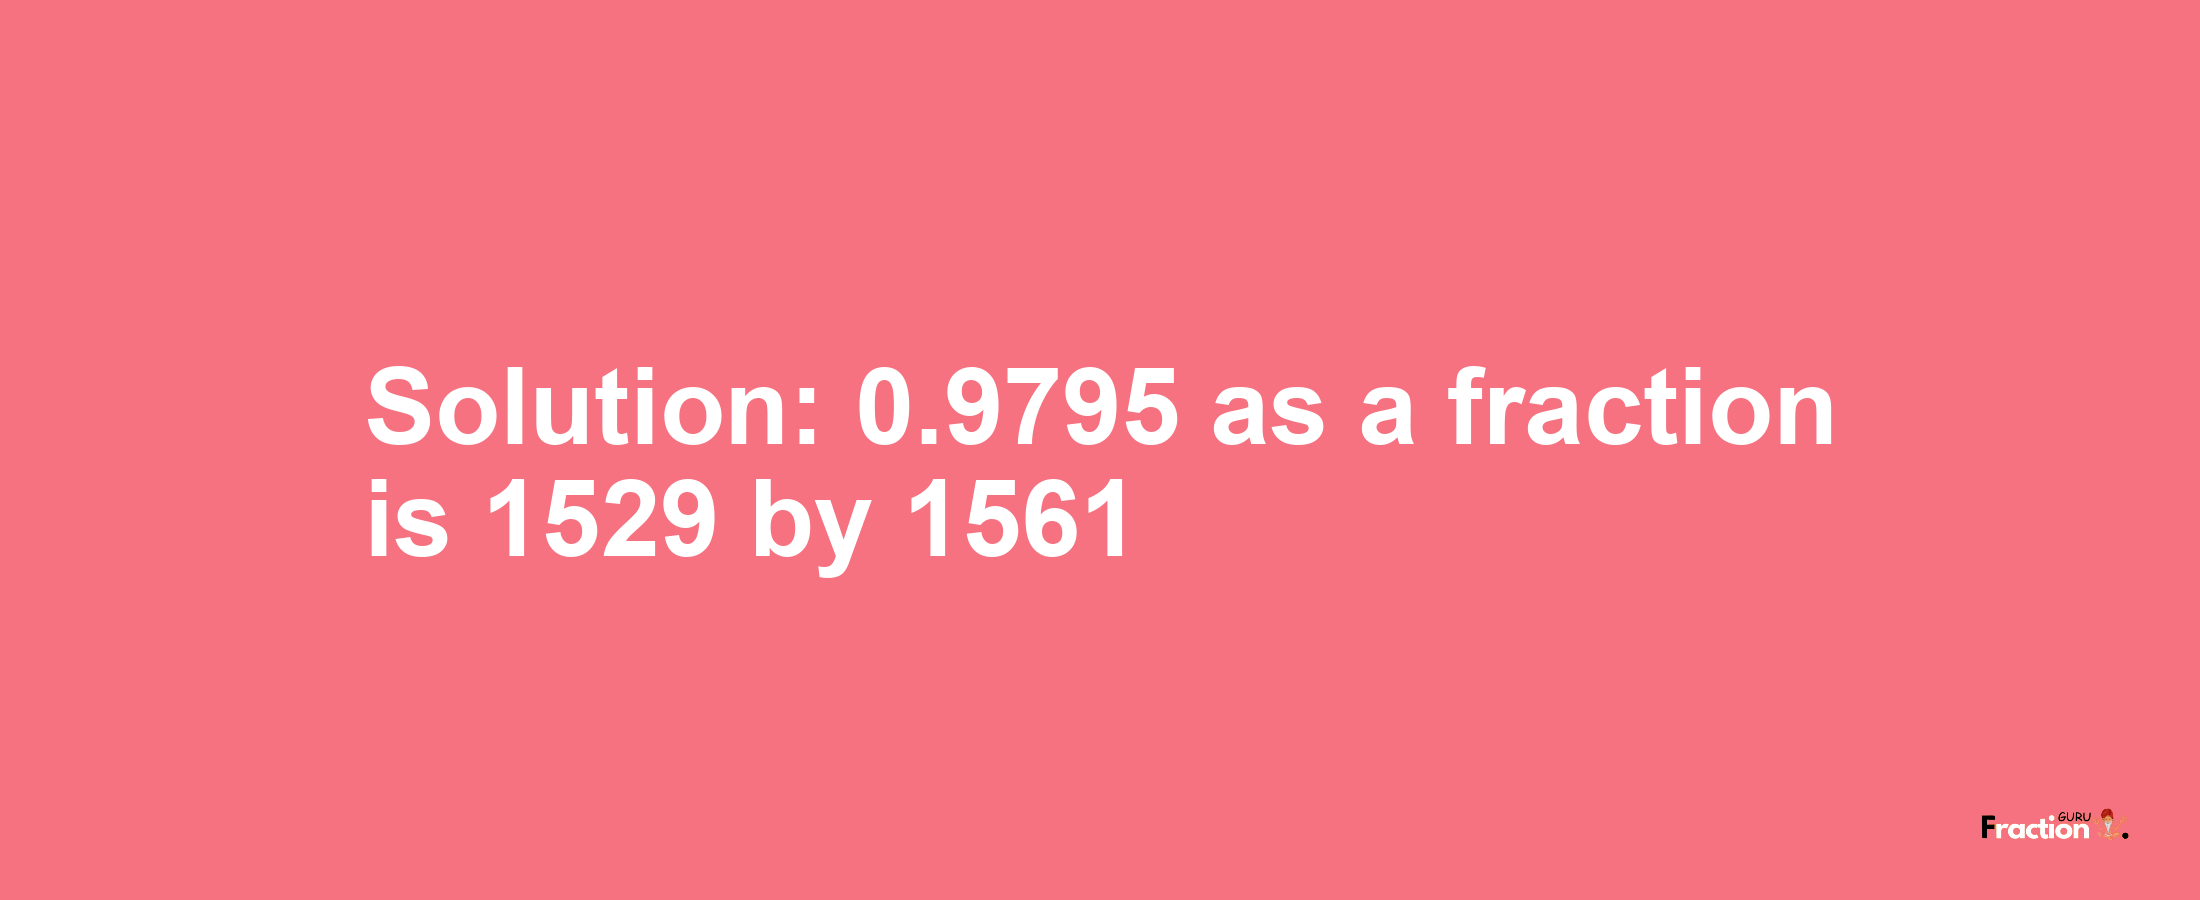 Solution:0.9795 as a fraction is 1529/1561